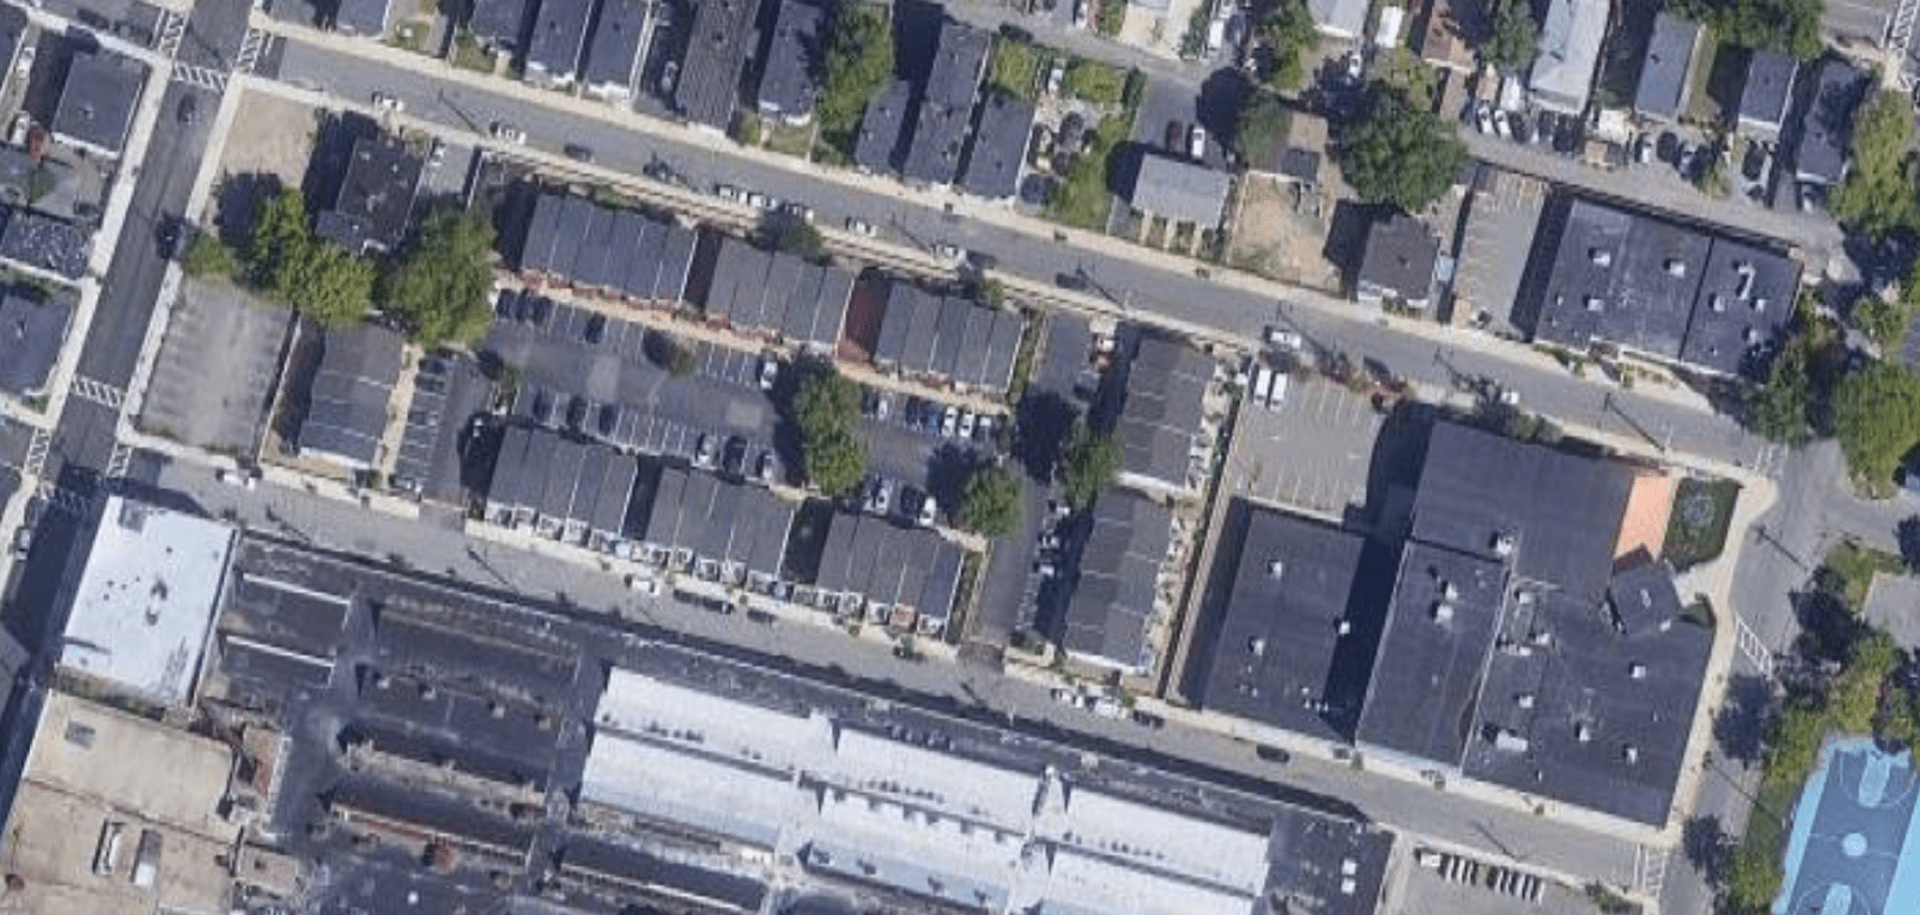 Arial view of the city block in Chelsea chosen for the Cool Block pilot project. (Screenshot via Google Maps)